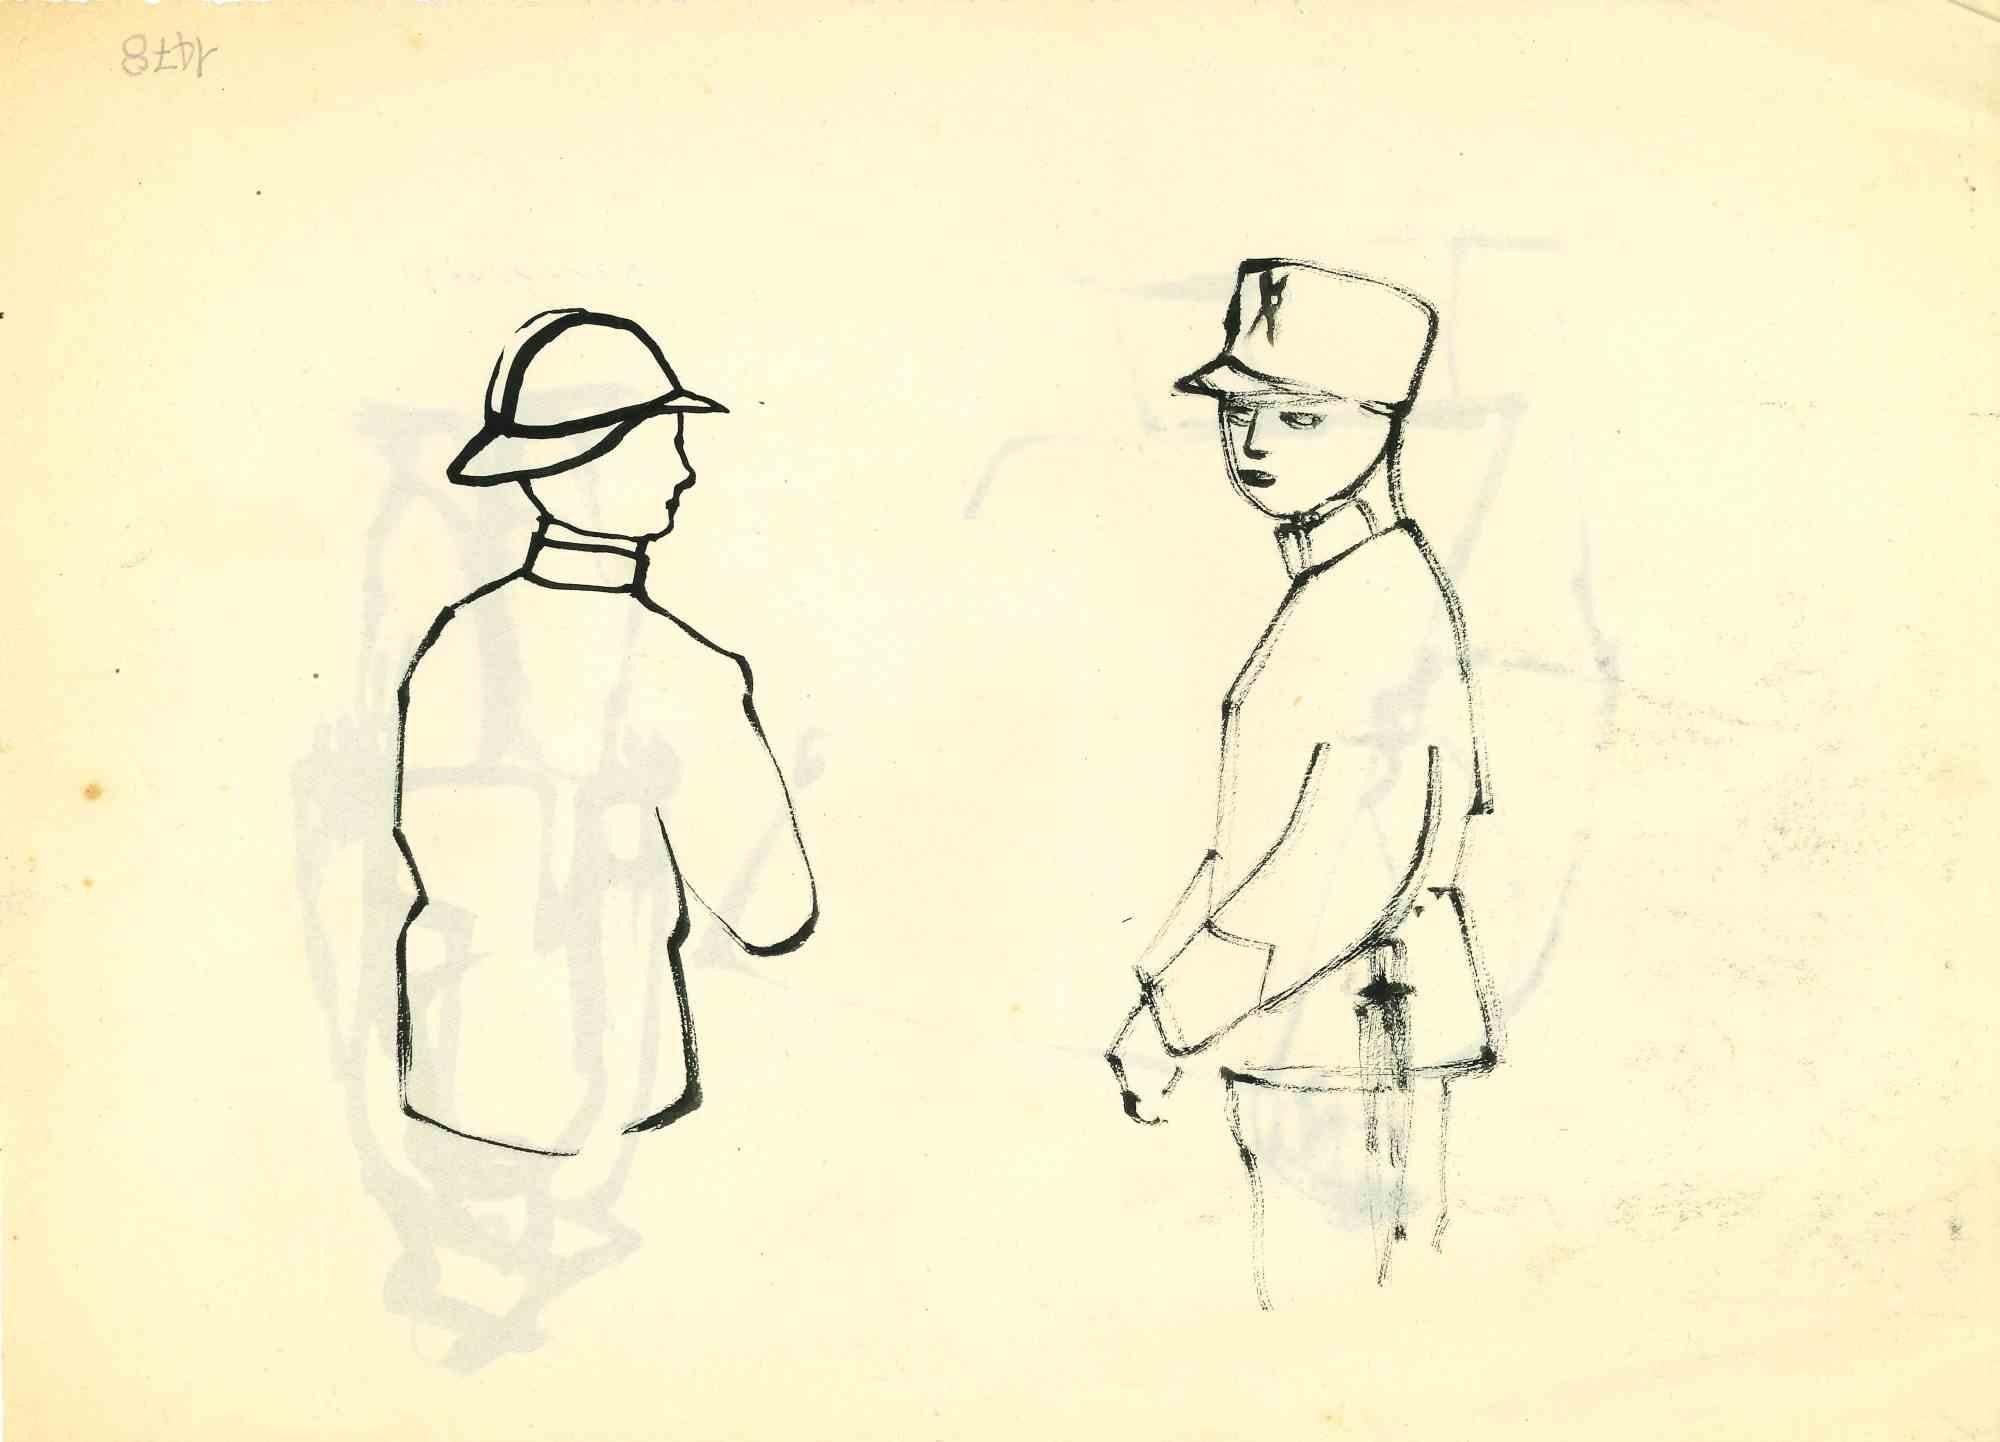 Soldiers - Drawing by Mino Maccari - Mid-20th Century